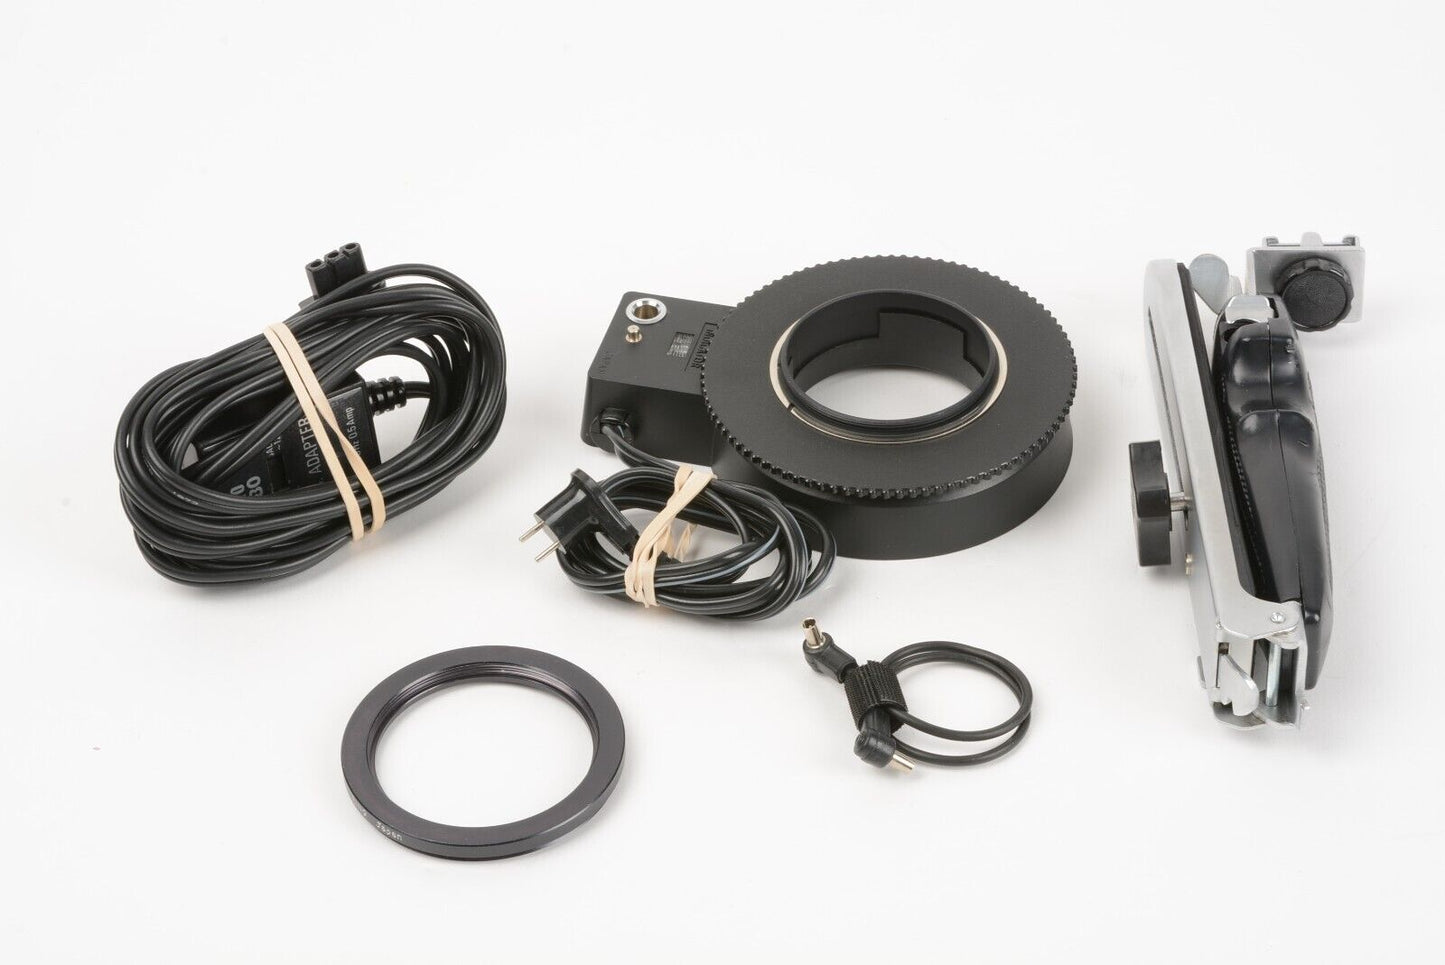 EXC++ CAPRO RL80 MACRO RING LIGHT, AC OR C BATTERY POWERED, 52mm OR 62mm MOUNT++